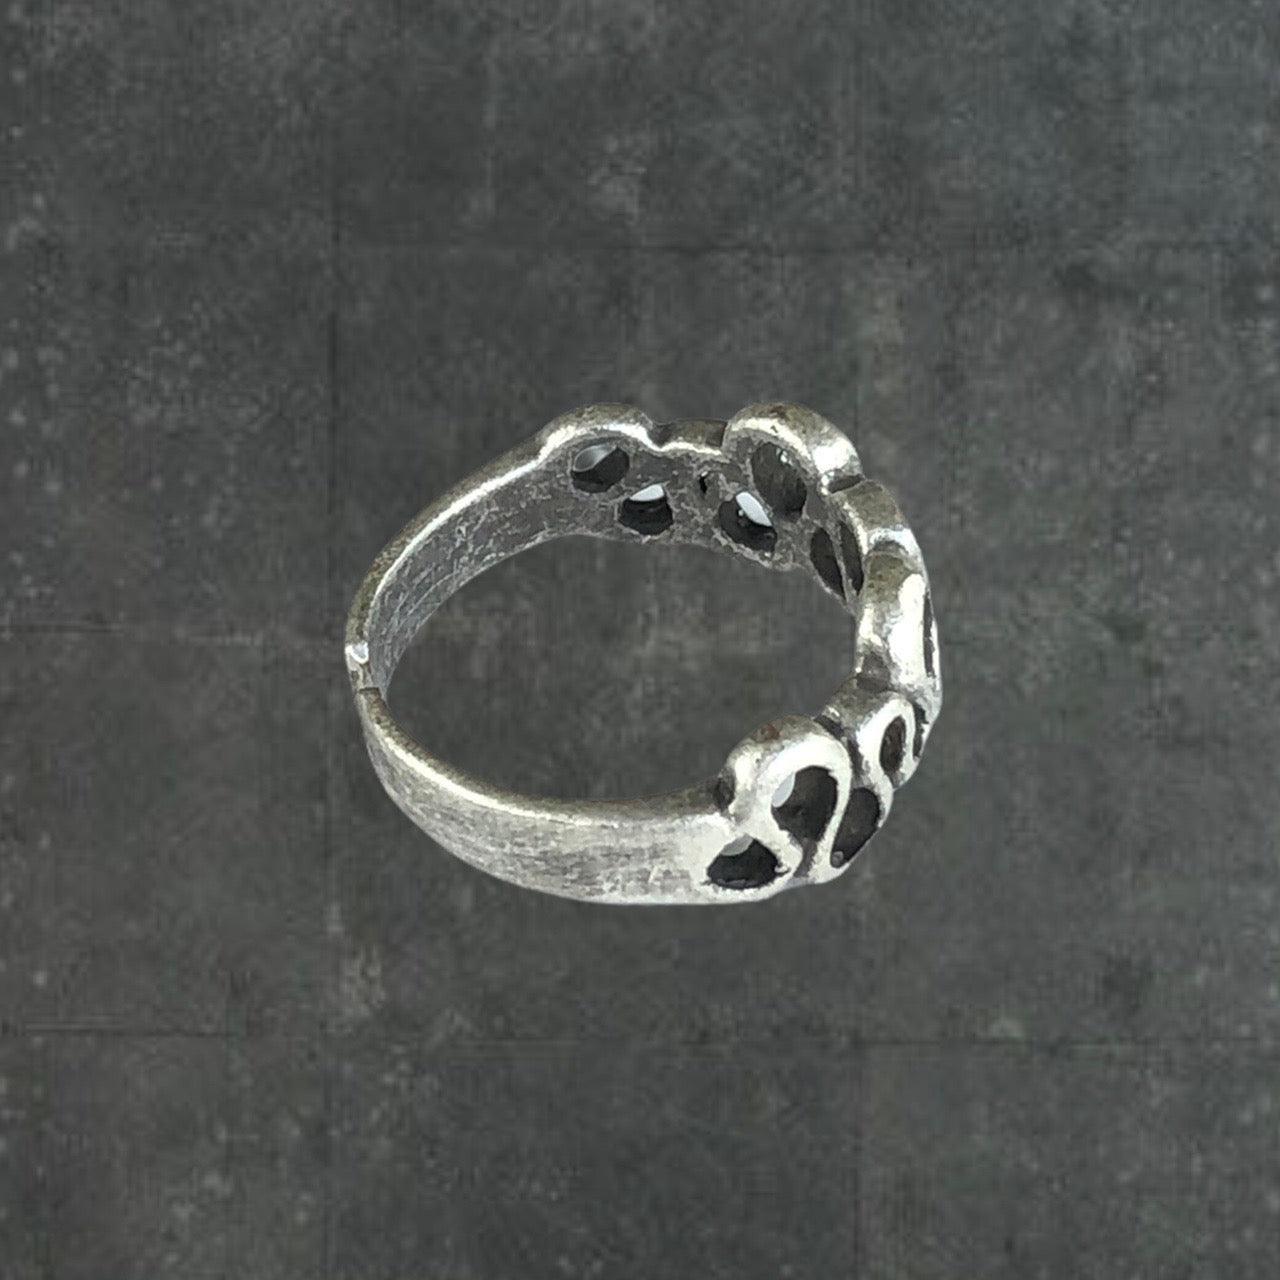 Octopus Ring - Known Source